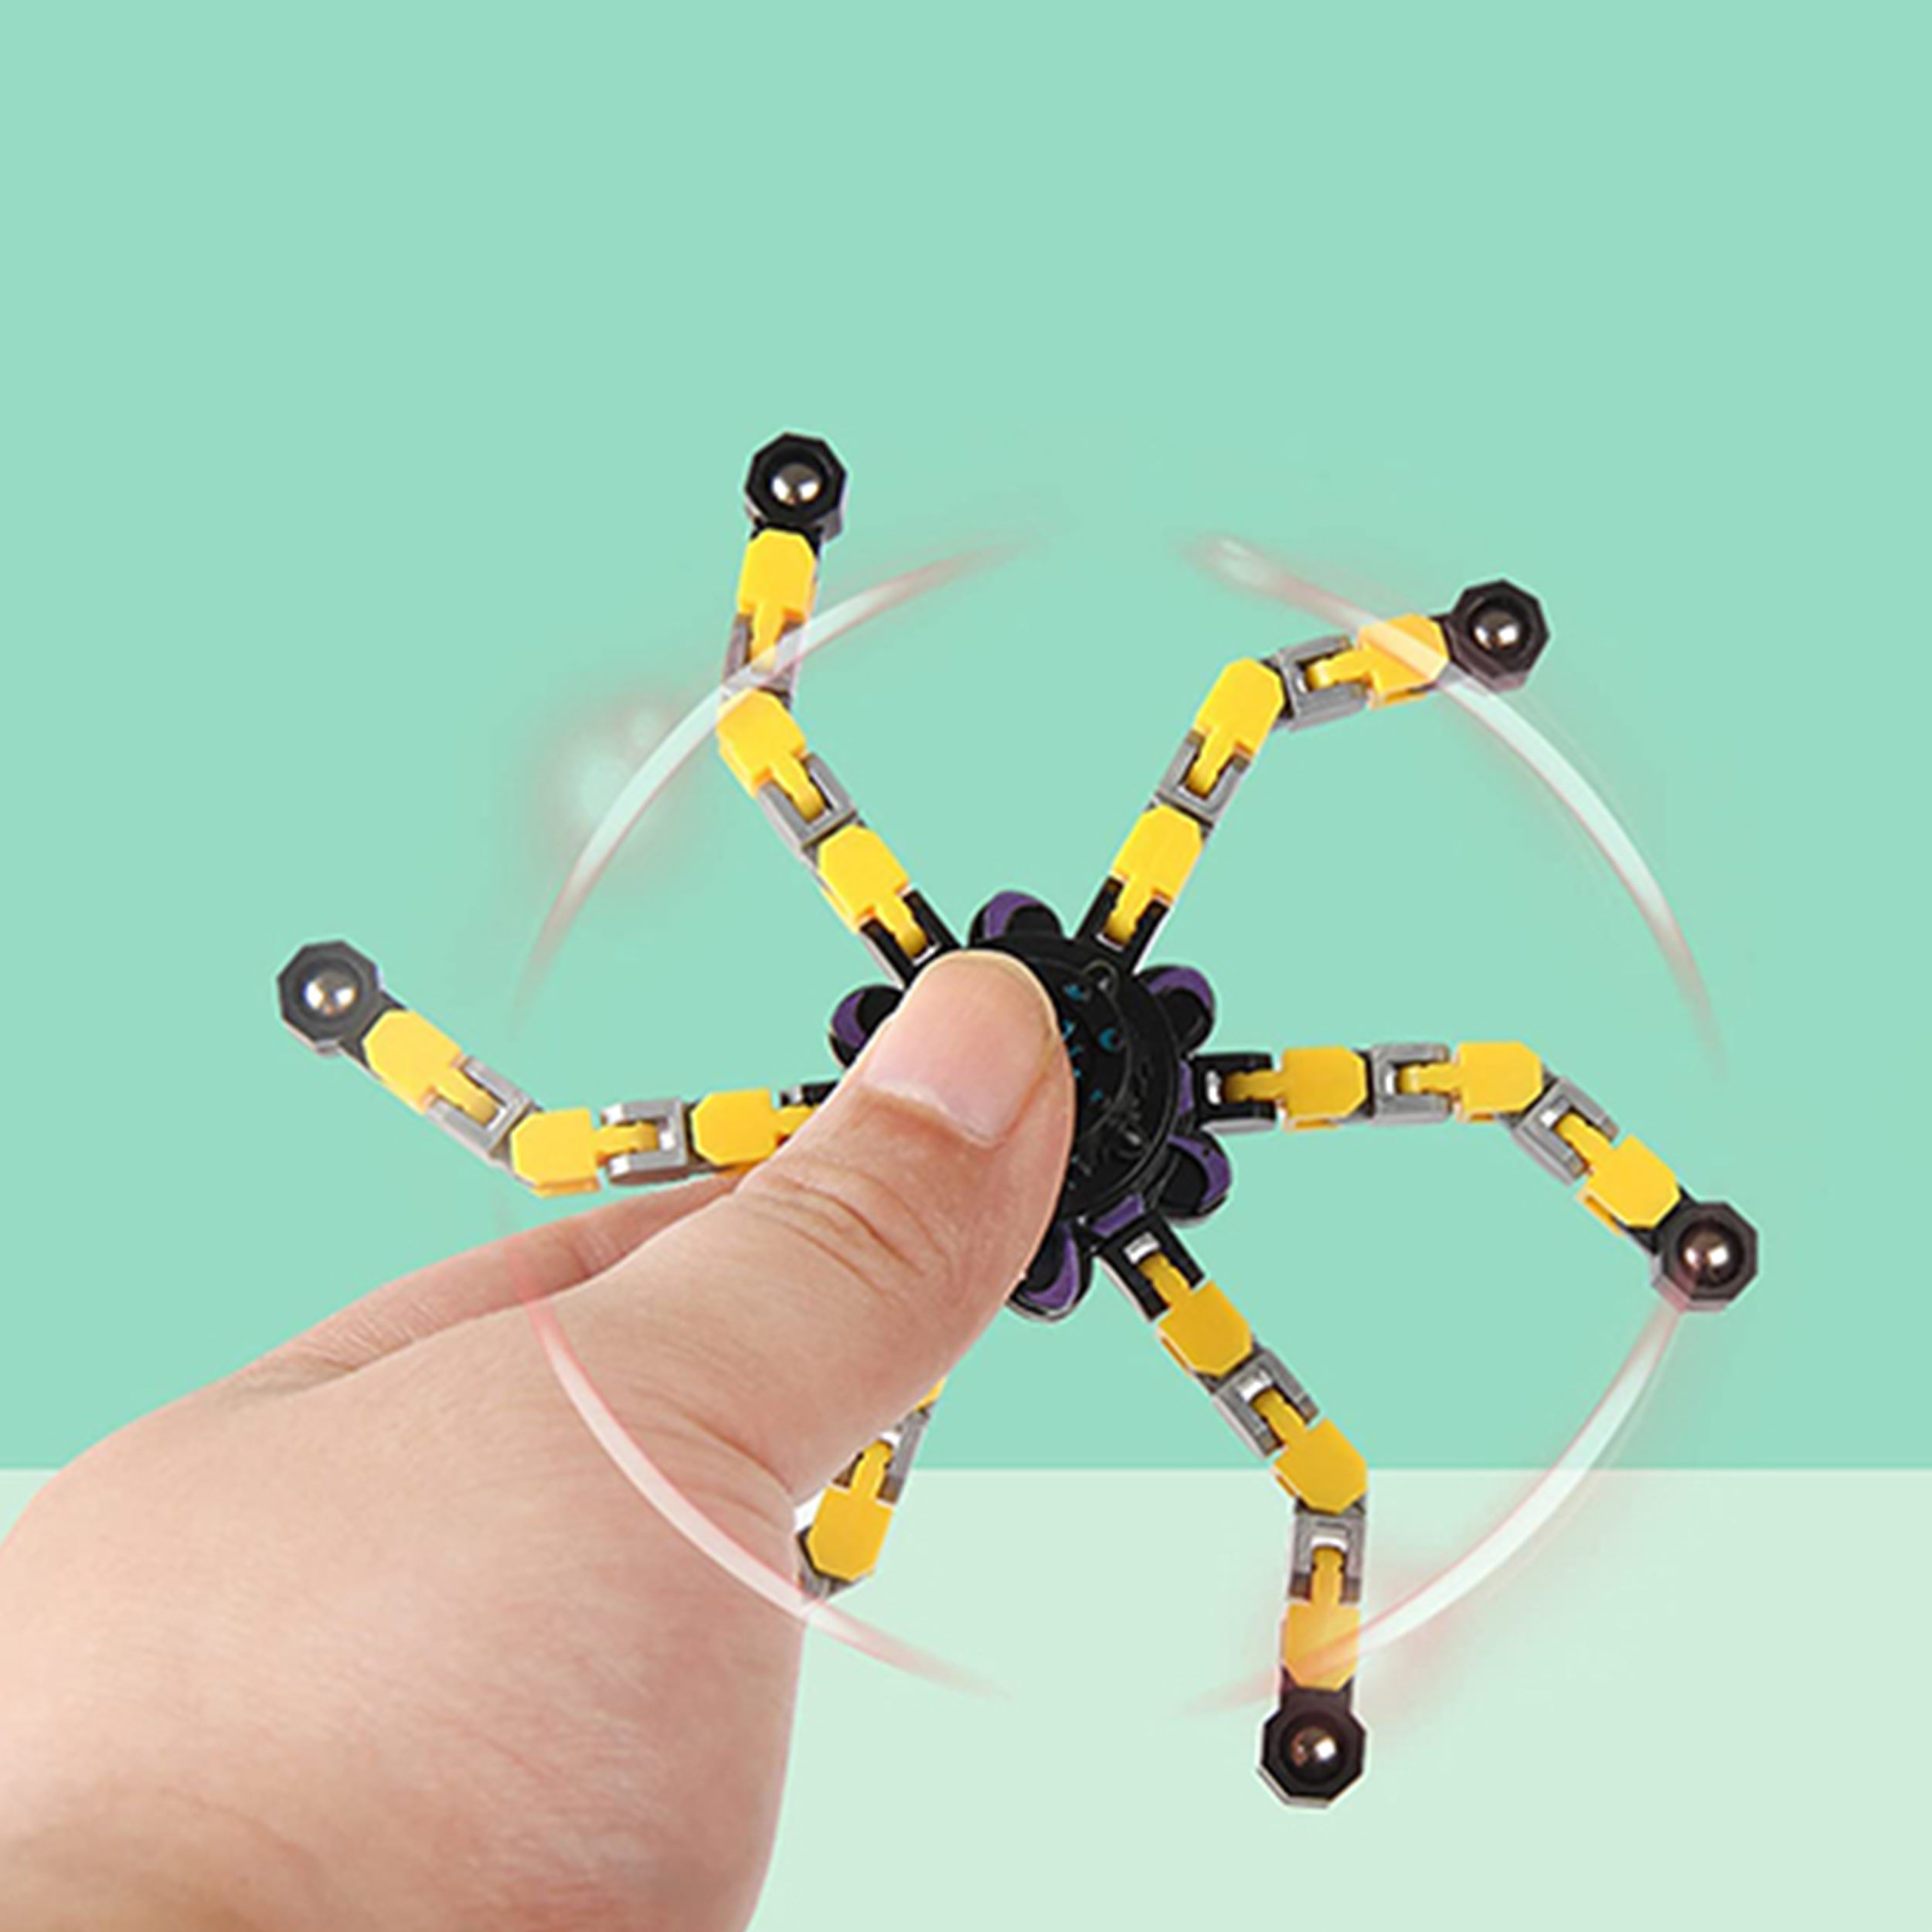 Create Your Own Fashion With Deformable Chain Fingertip Spinner Toy